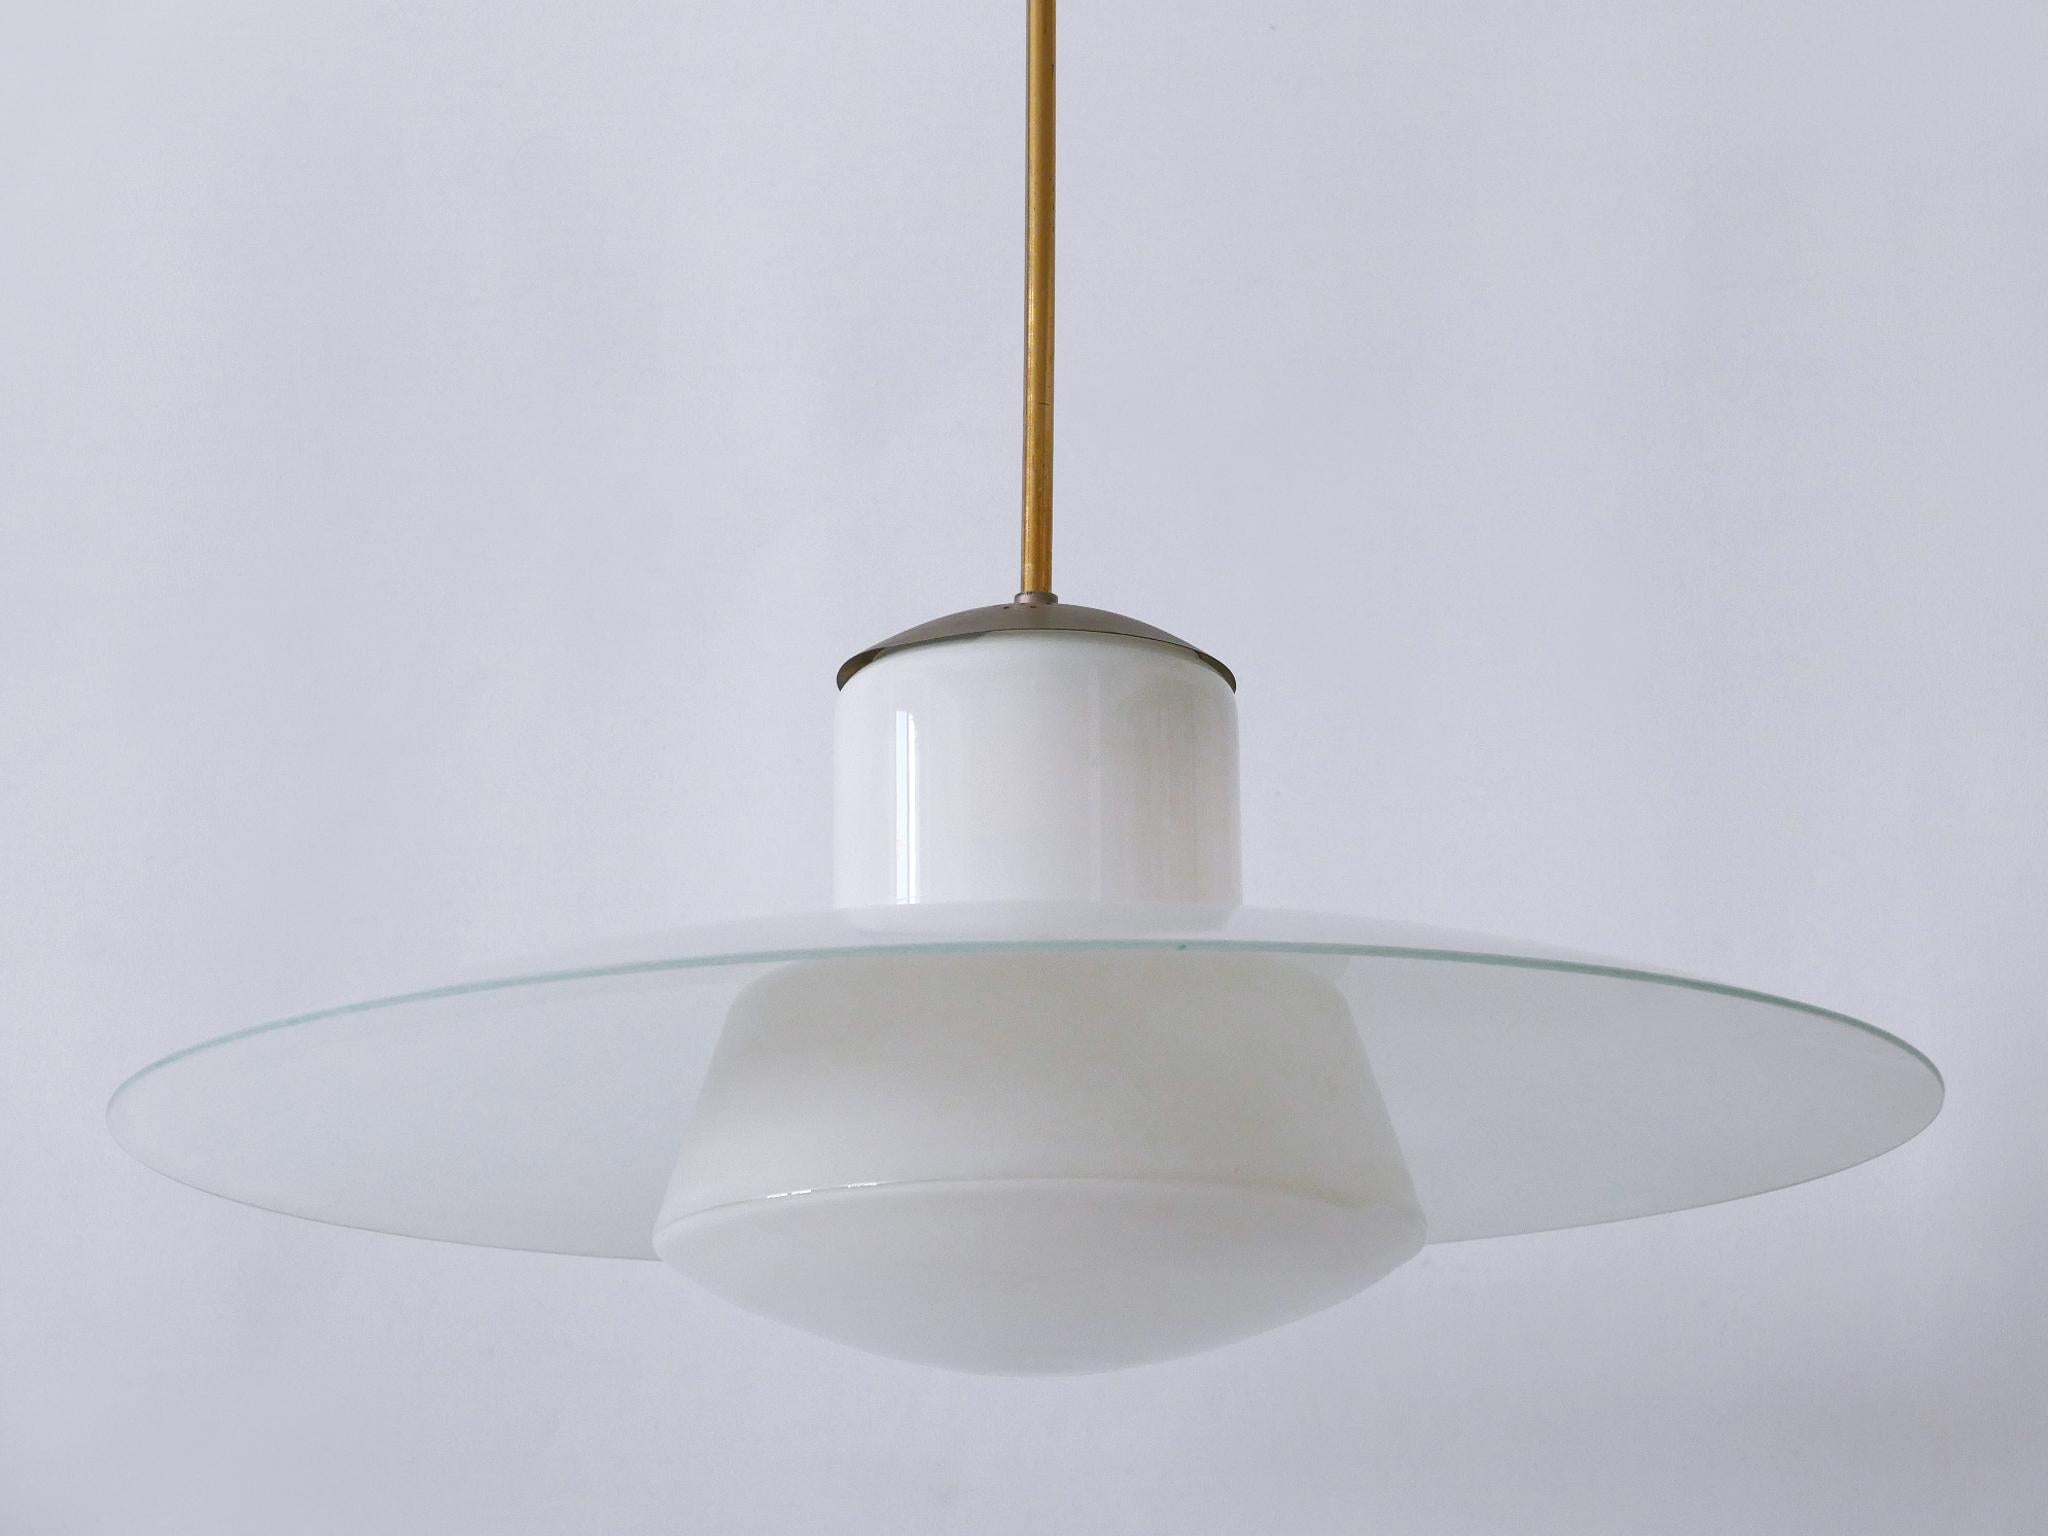 Rare Mid-Century Modern Pendant Lamp by Wolfgang Tümpel for Doria Germany 1950s For Sale 3